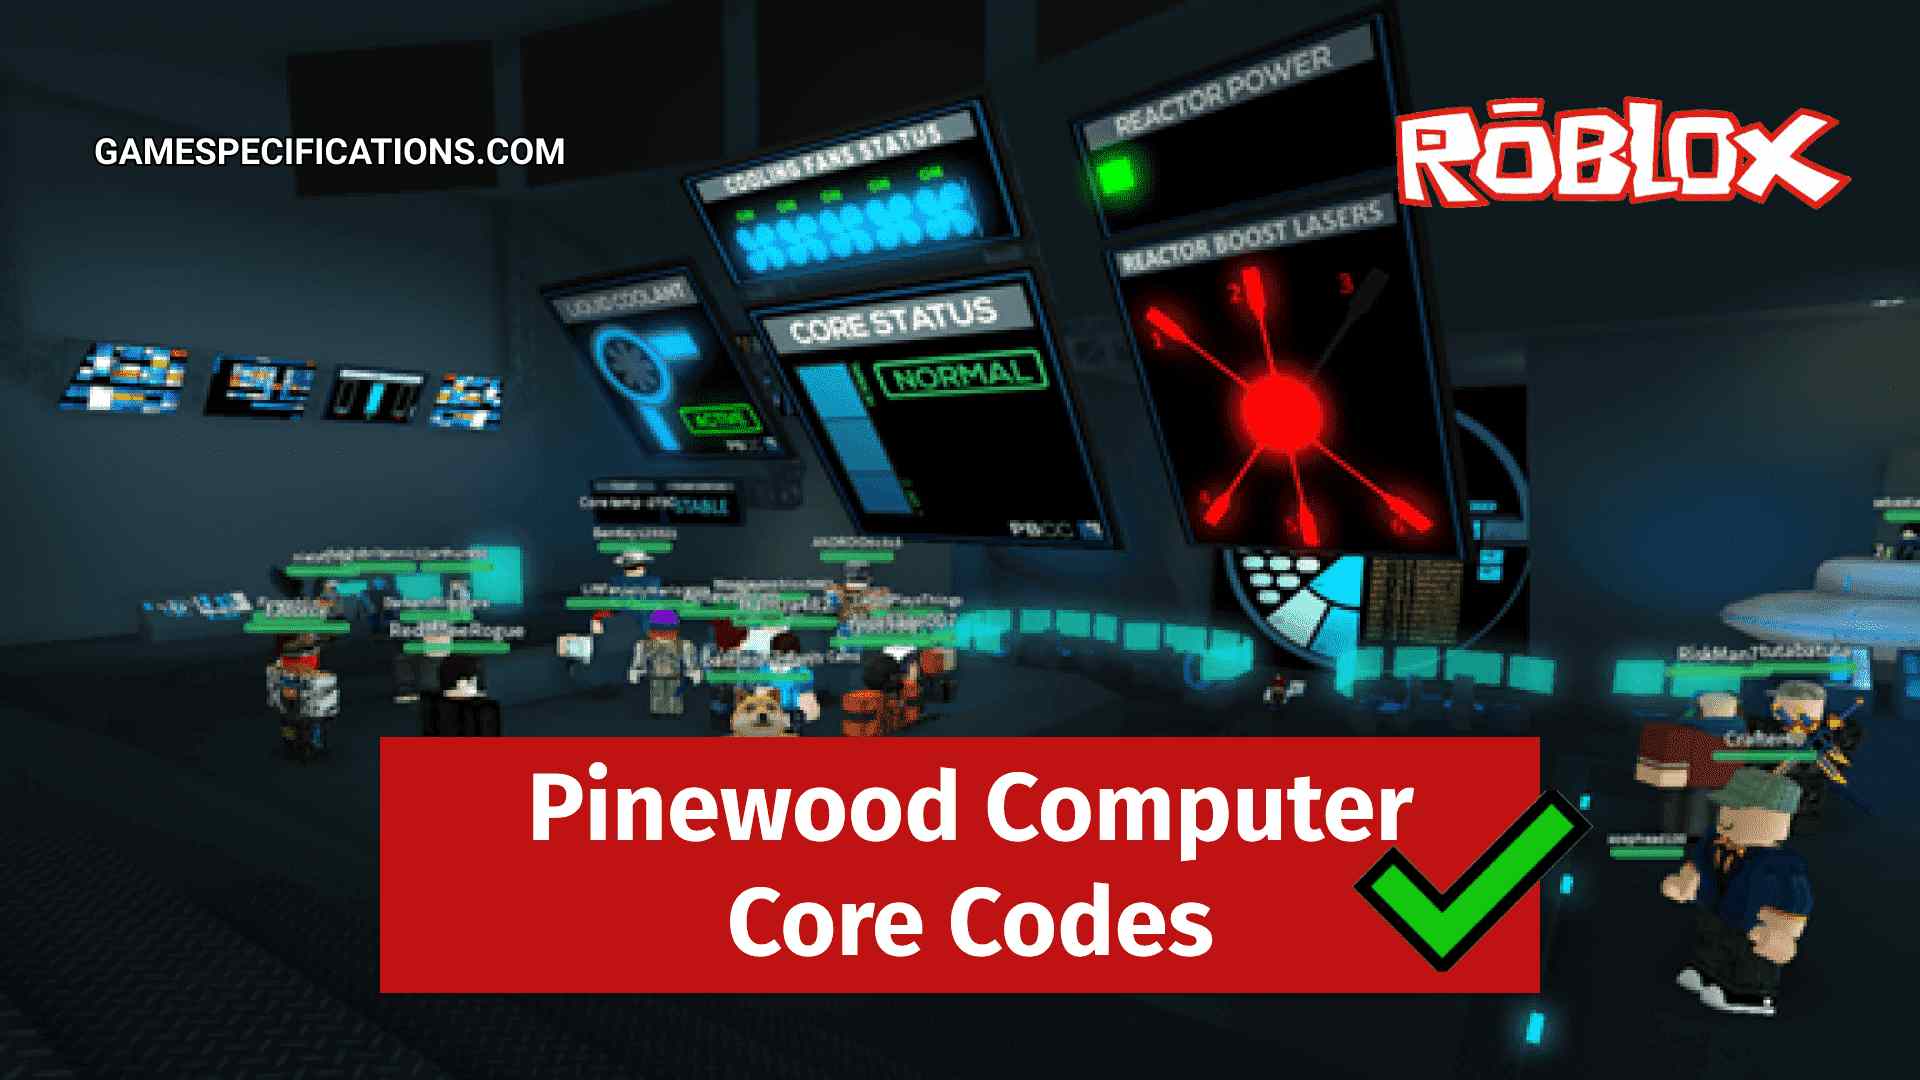 Roblox Pinewood Computer Core Codes July 2021 Game Specifications - fusion roblox uncopylocked